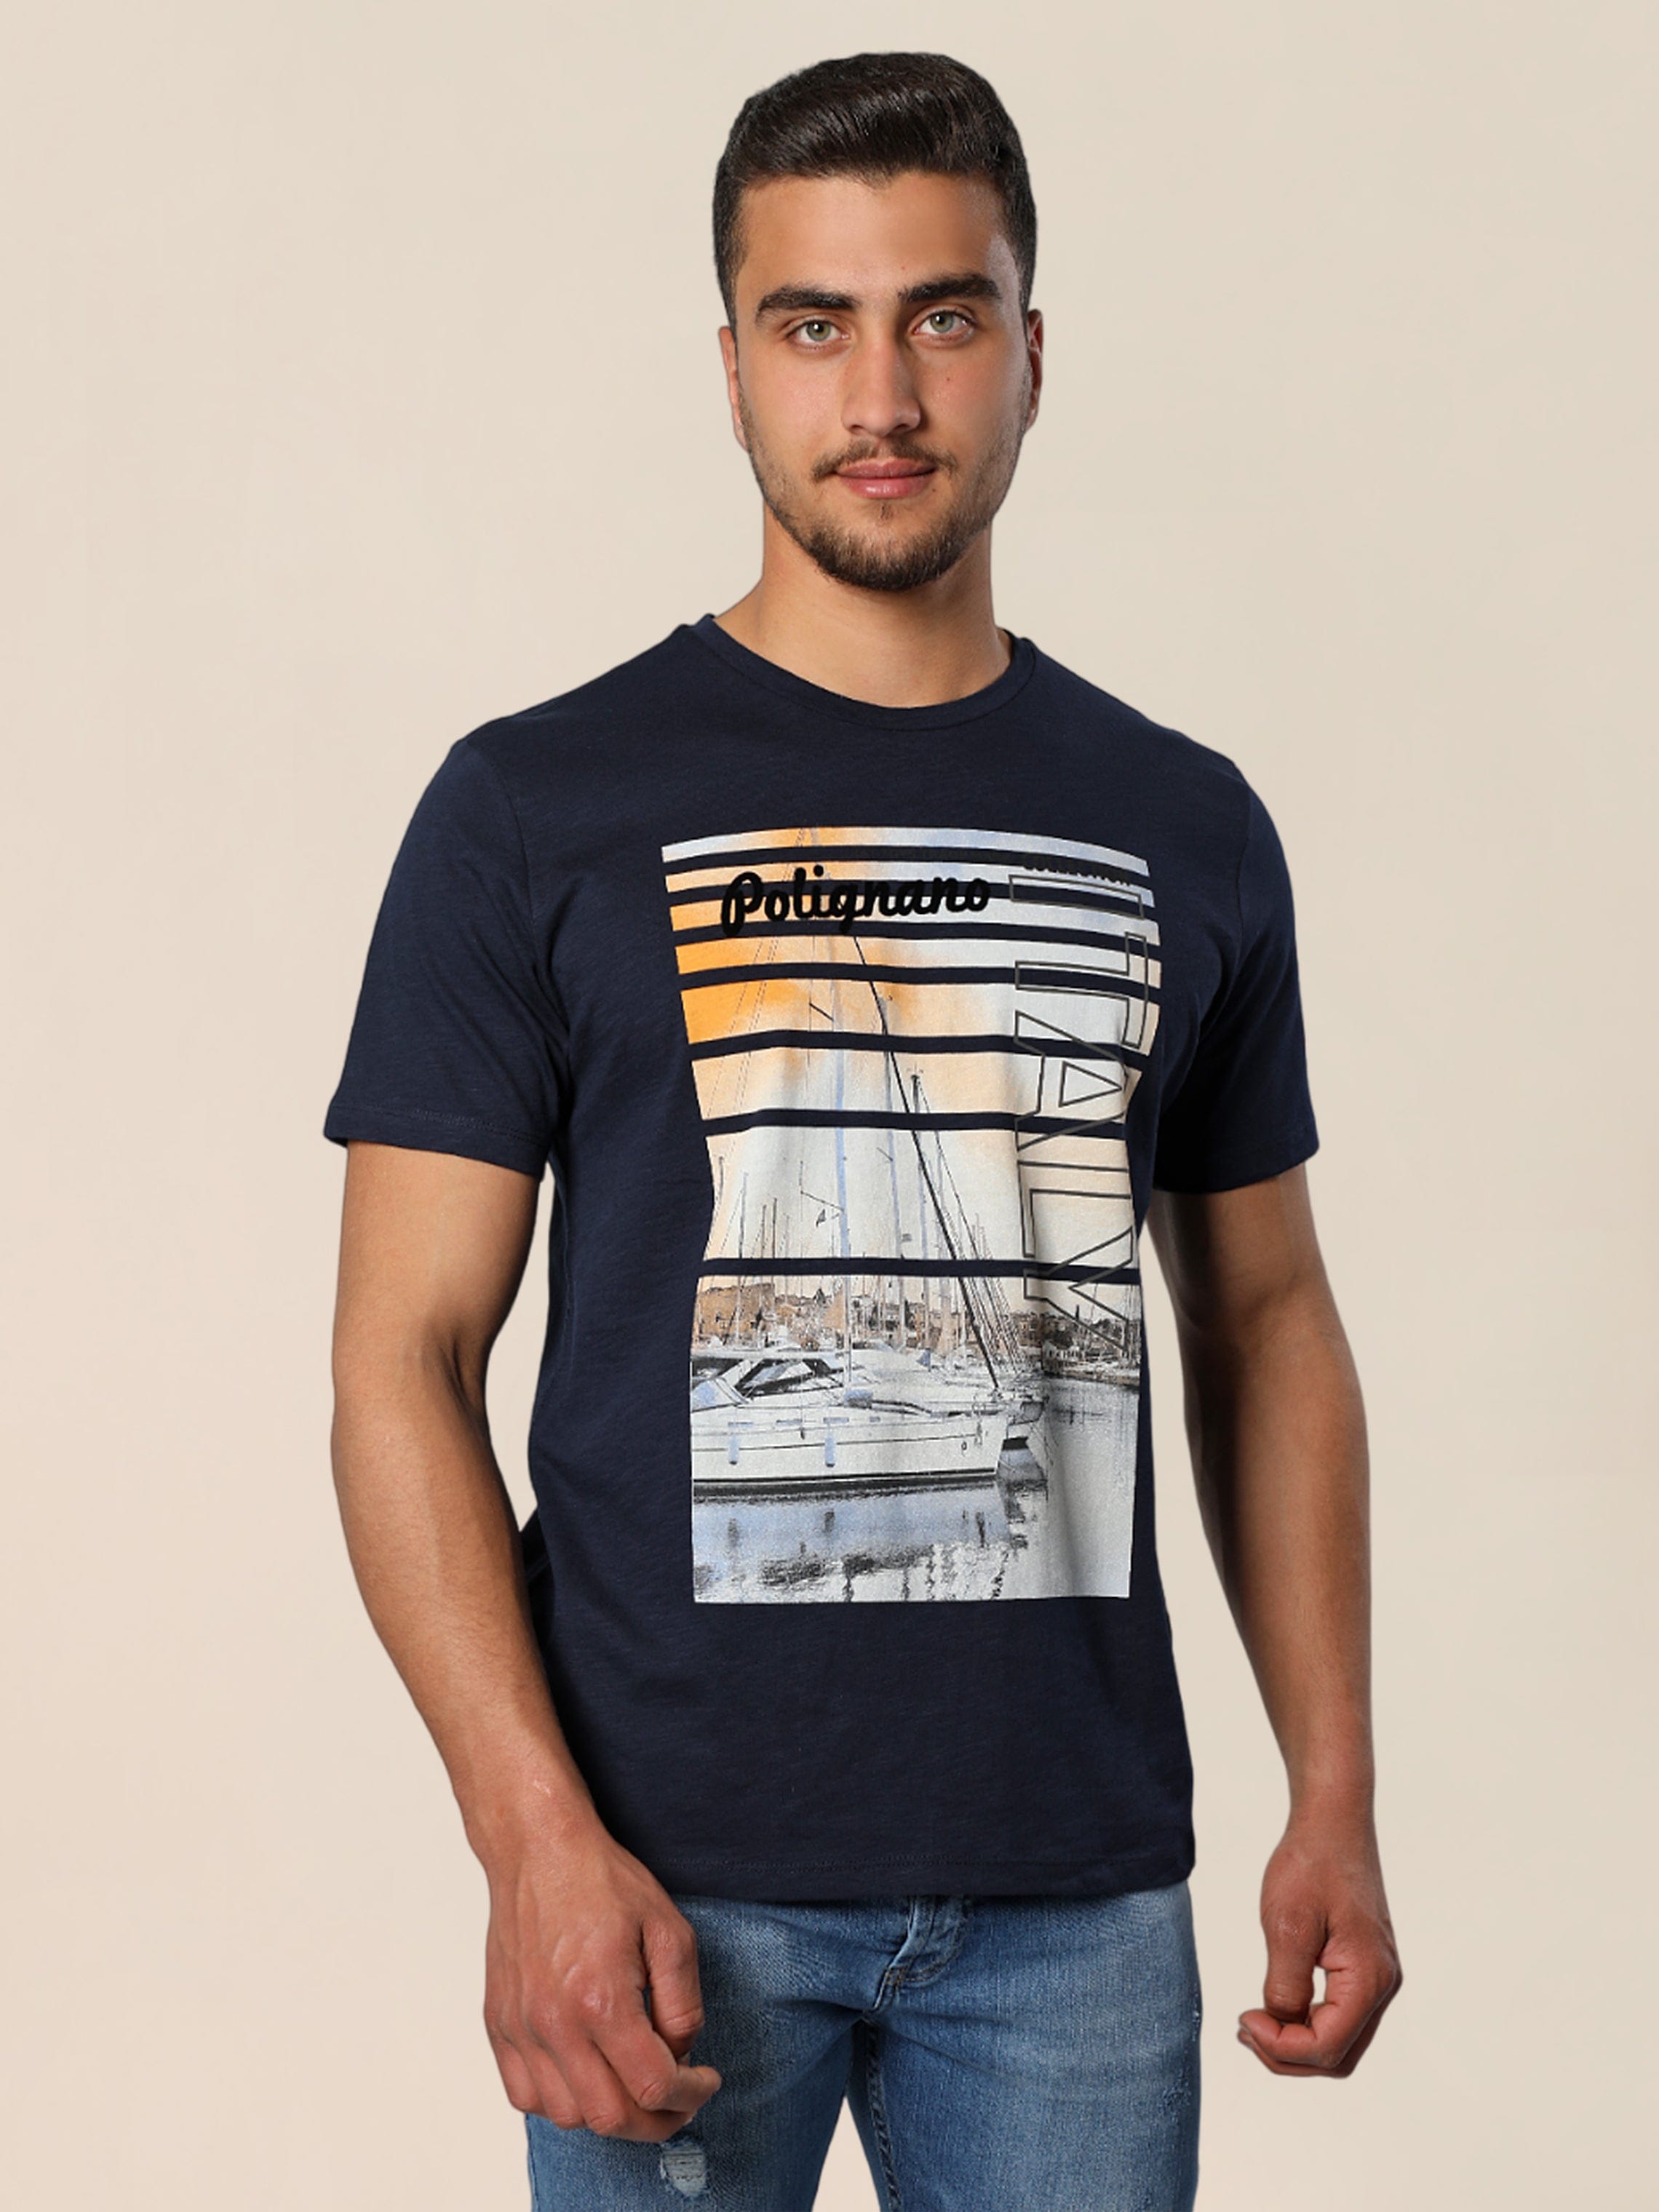 Men Summer T-shirt With Italy Themed Printed Design